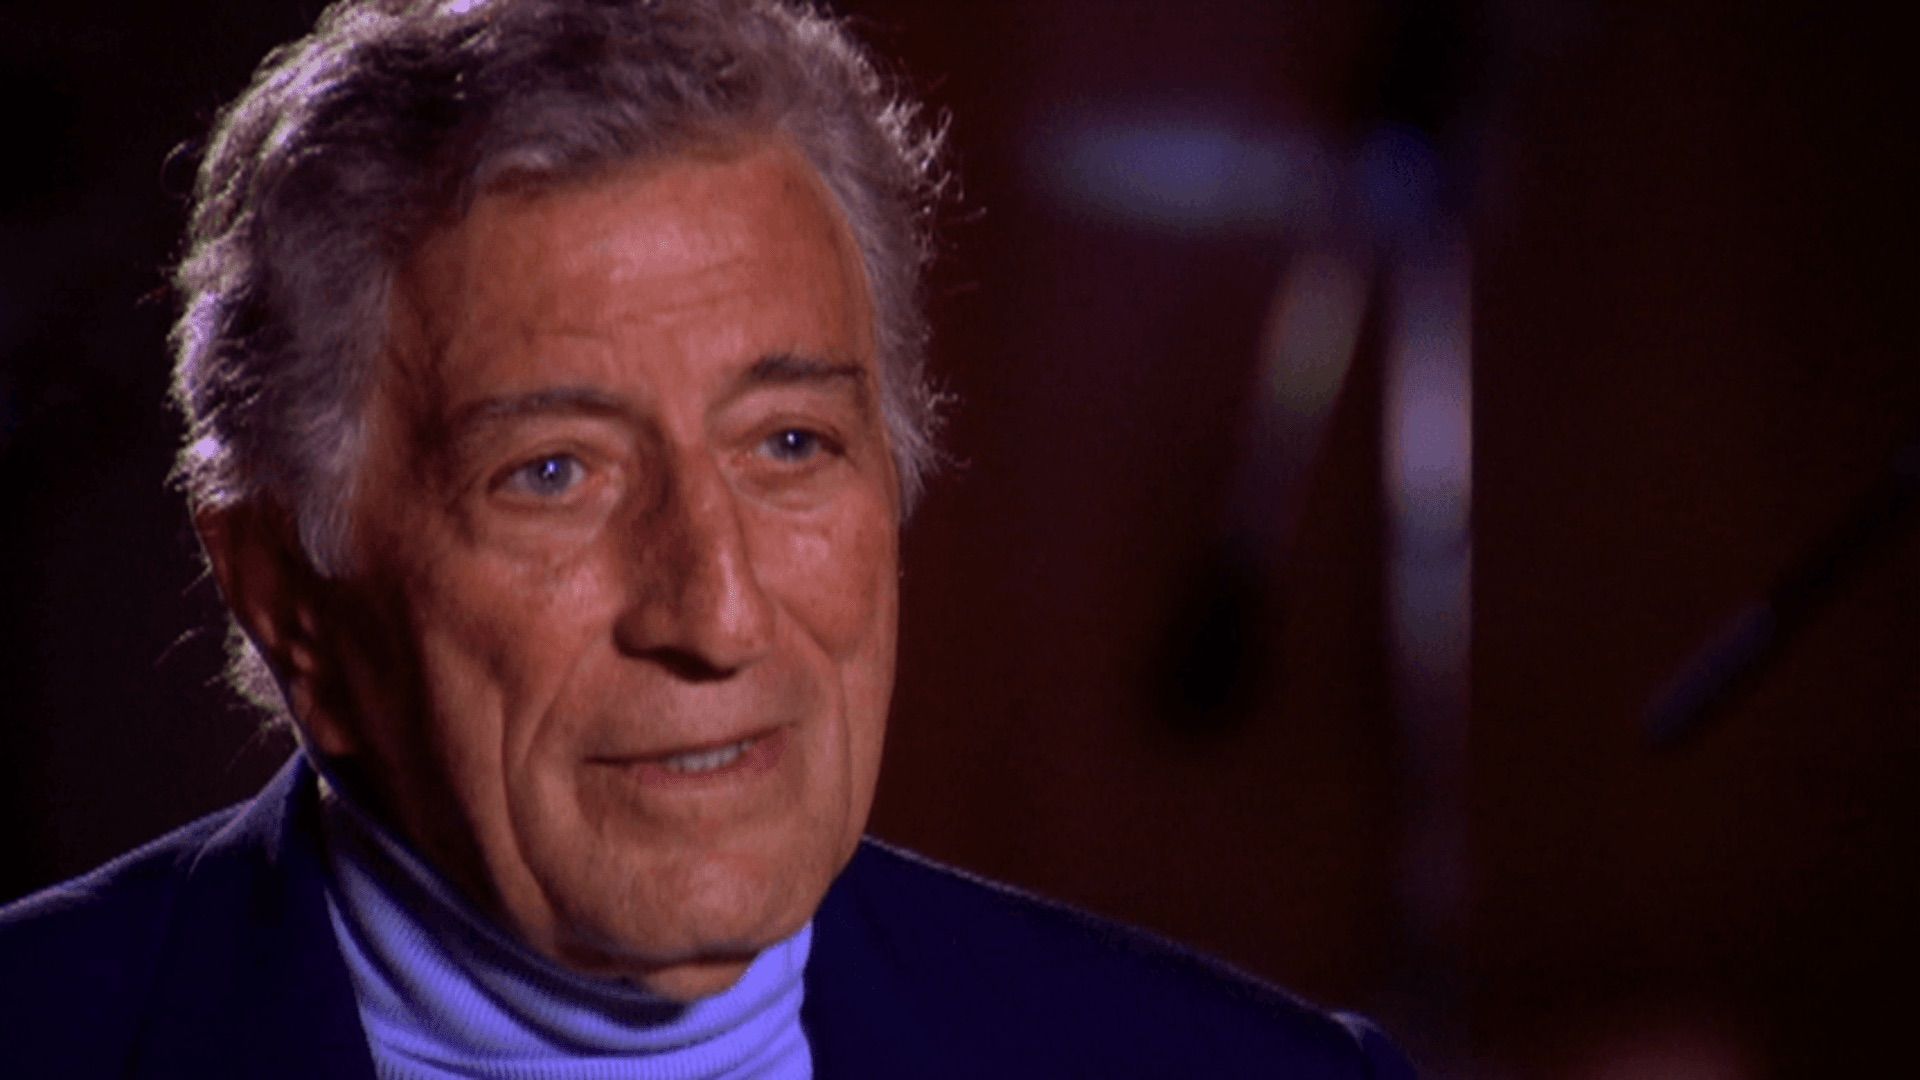 Tony Bennett: Duets - The Making of an American Classic Backdrop